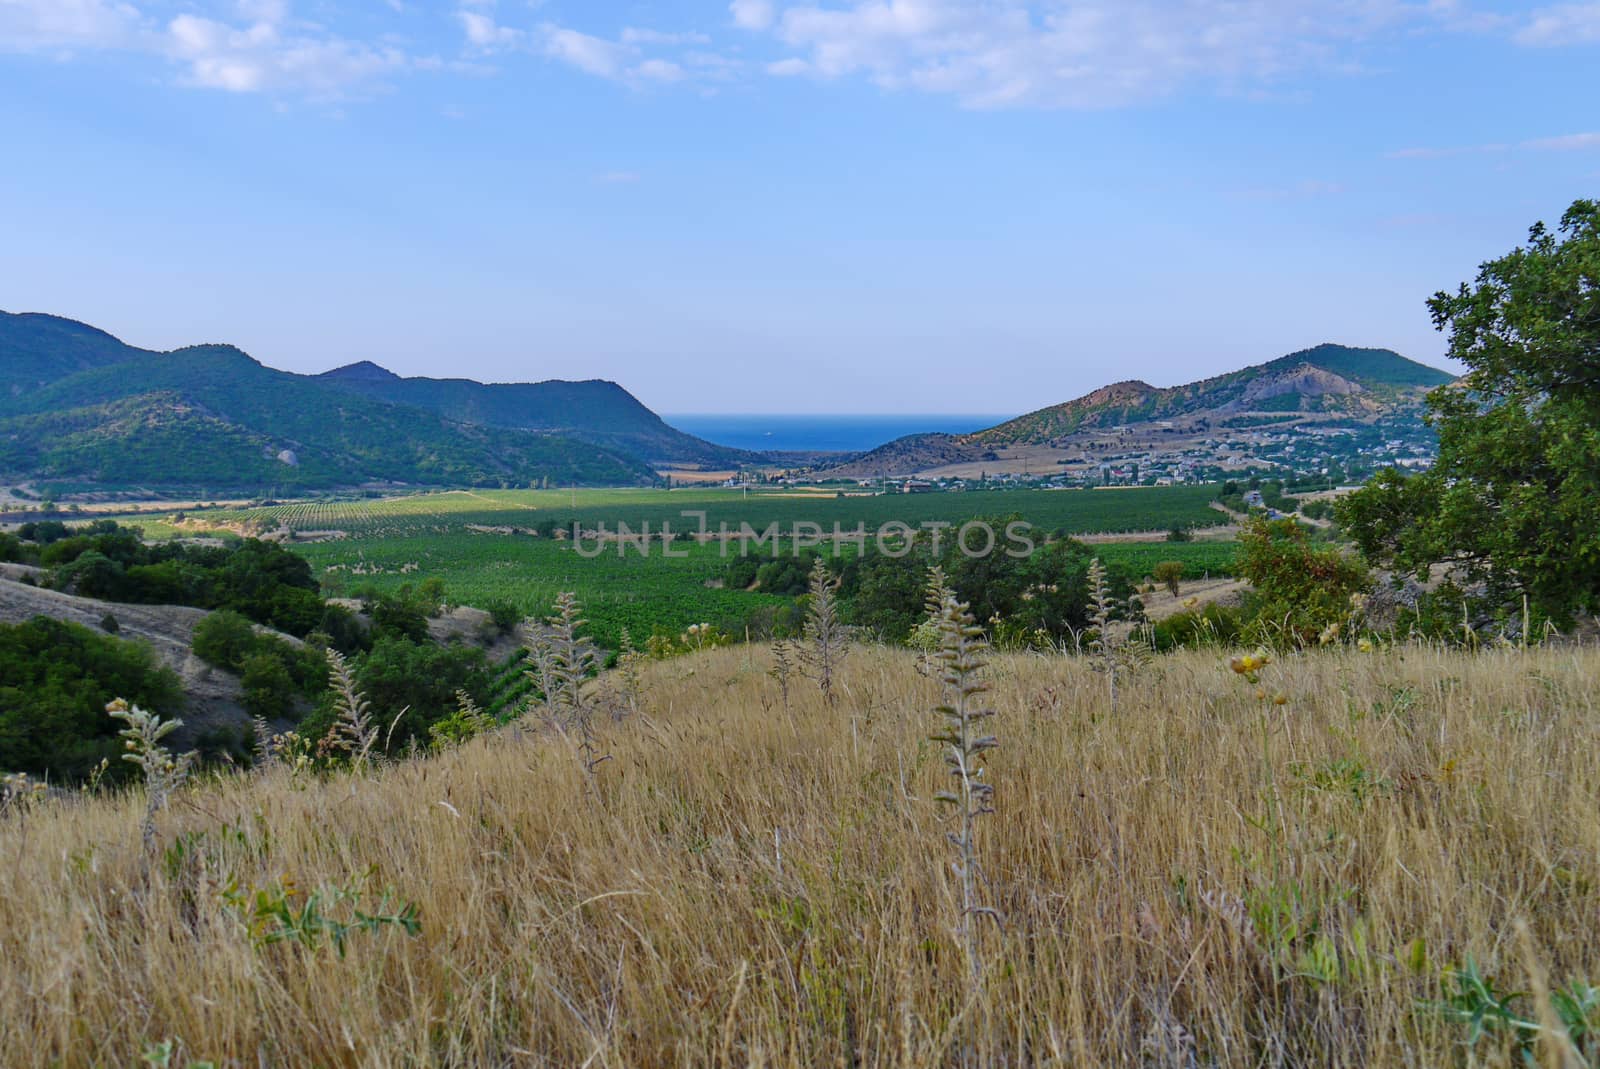 Beautiful view of the mountain valley with bright green coloring of the vegetation in it. With visible houses near the foot of the mountain and blue sea visible between the slope by Adamchuk